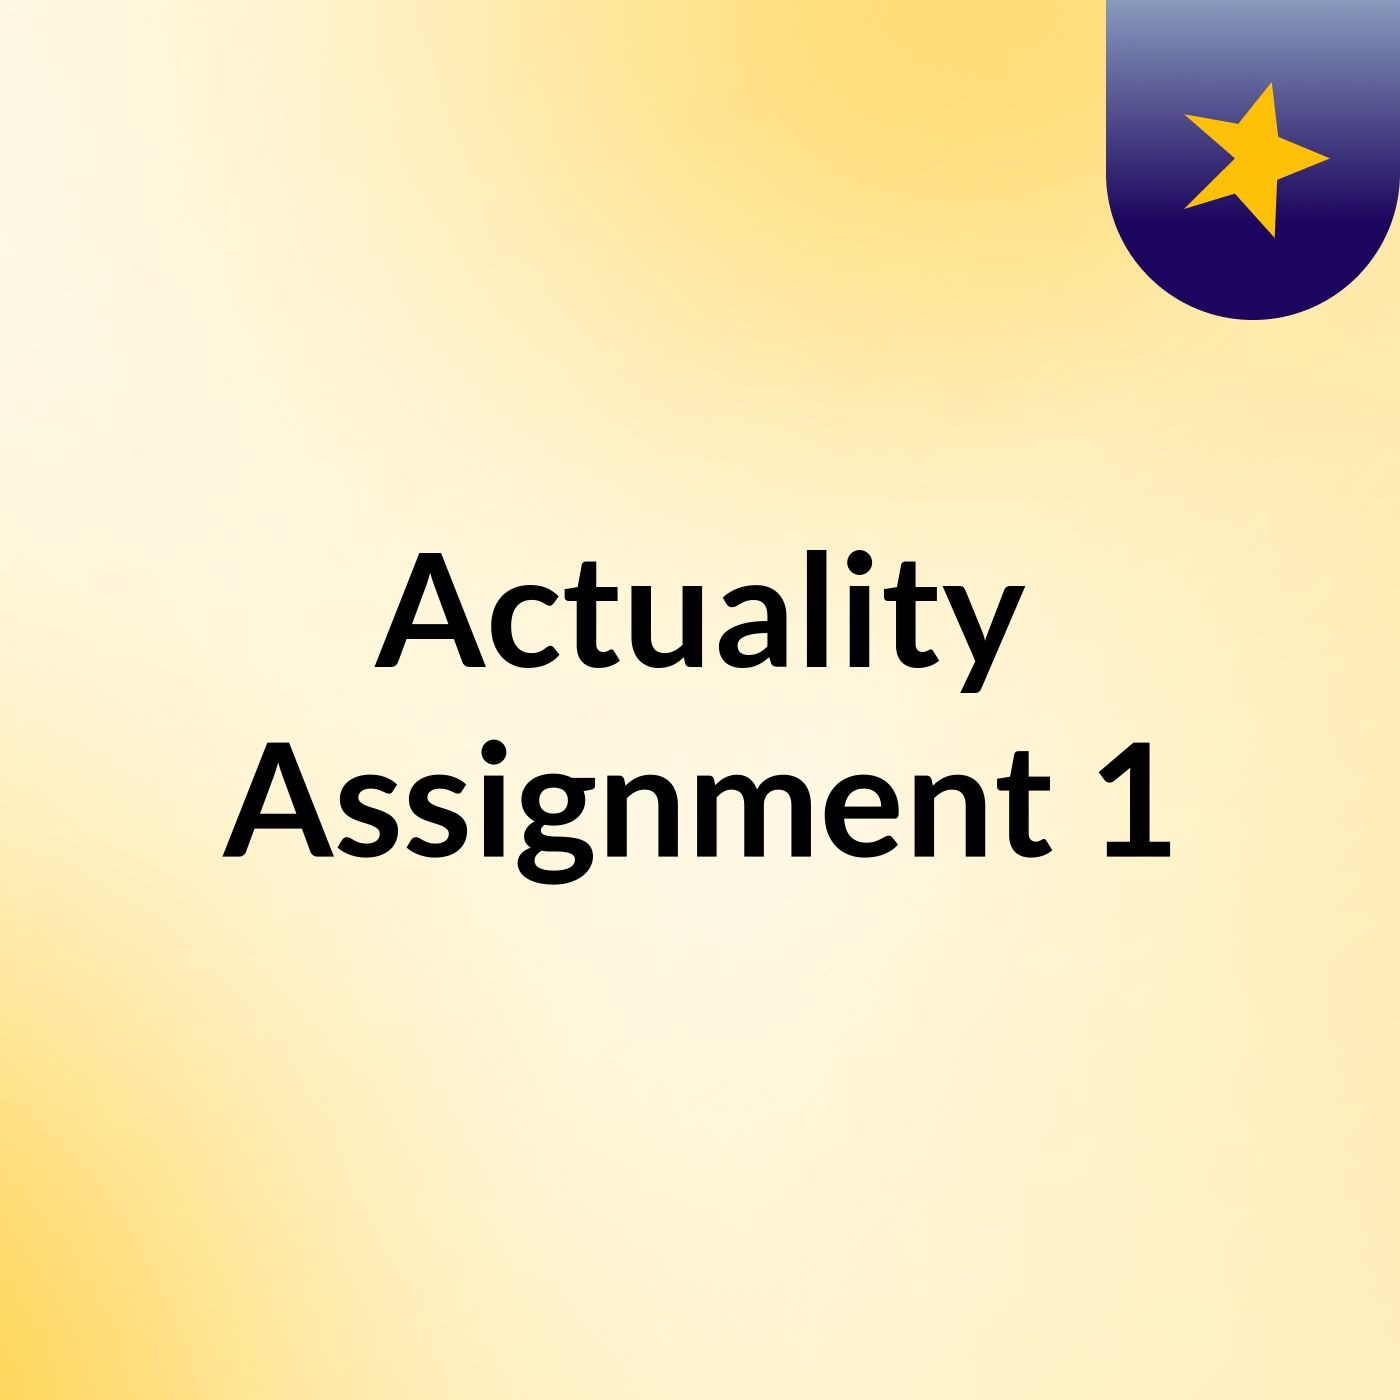 Episode 18 - Actuality Assignment 1